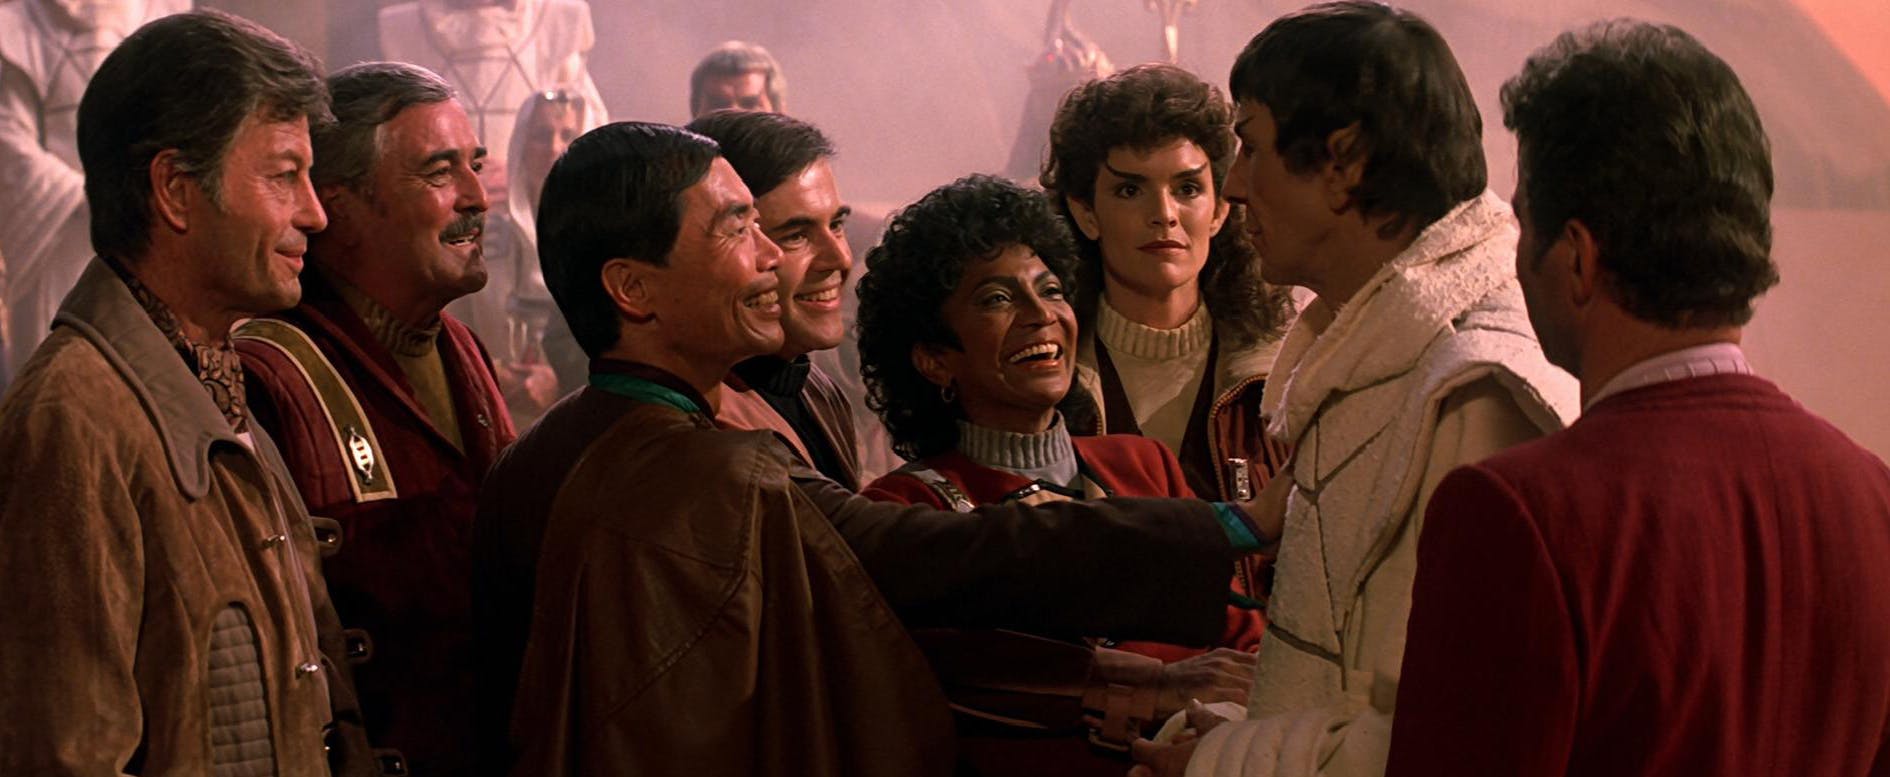 The Enterprise crew (Bones, Scotty, Sulu, Chekov, Uhura, Saavik, and Kirk) are joyful with the return of Spock in Star Trek III: The Search for Spock